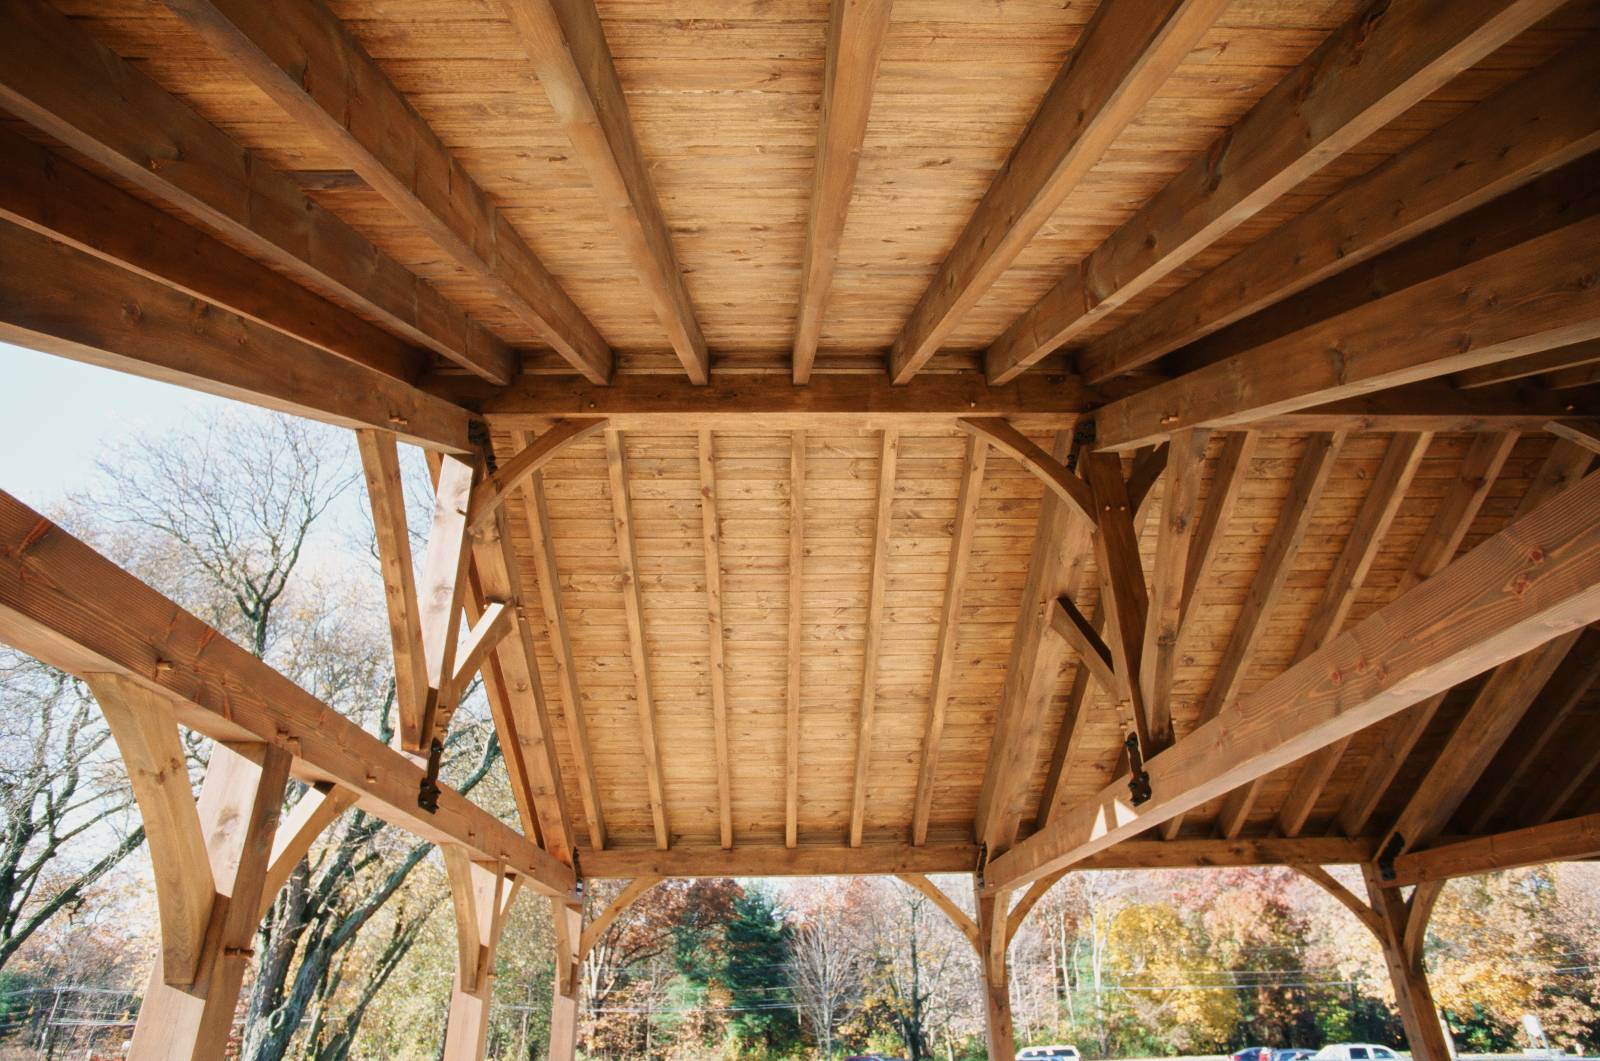 King Post Trusses with Arched Braces • Ridge Beam • Timber Rafters